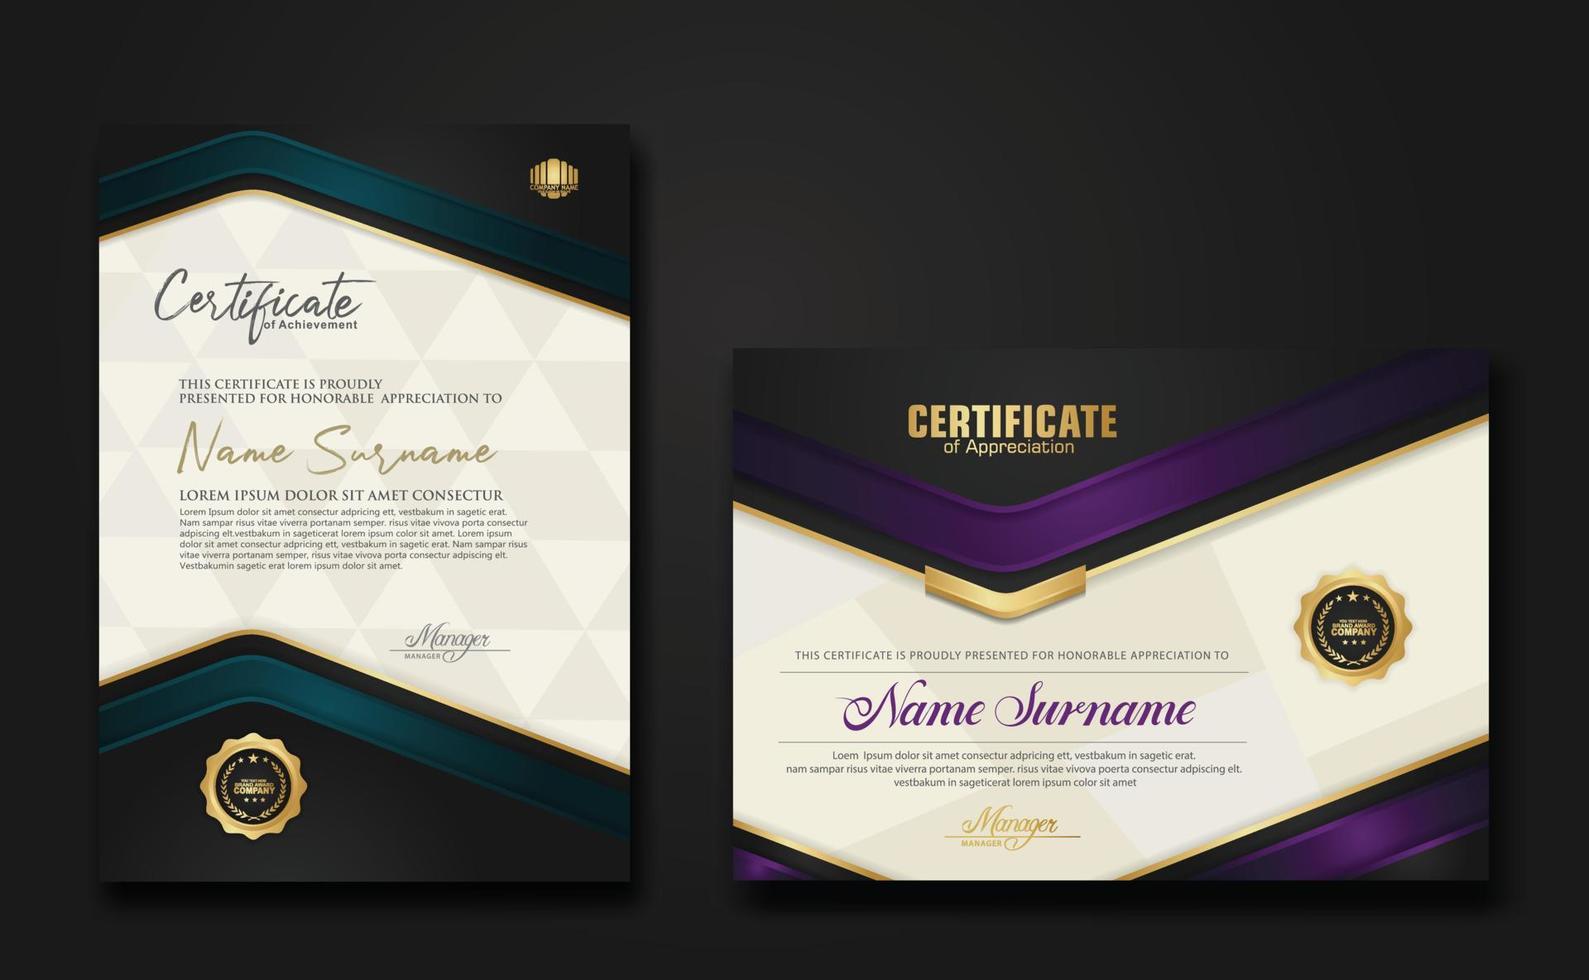 New design two set luxury certificate template with shadow effect on overlap layers and cream color on pattern background vector